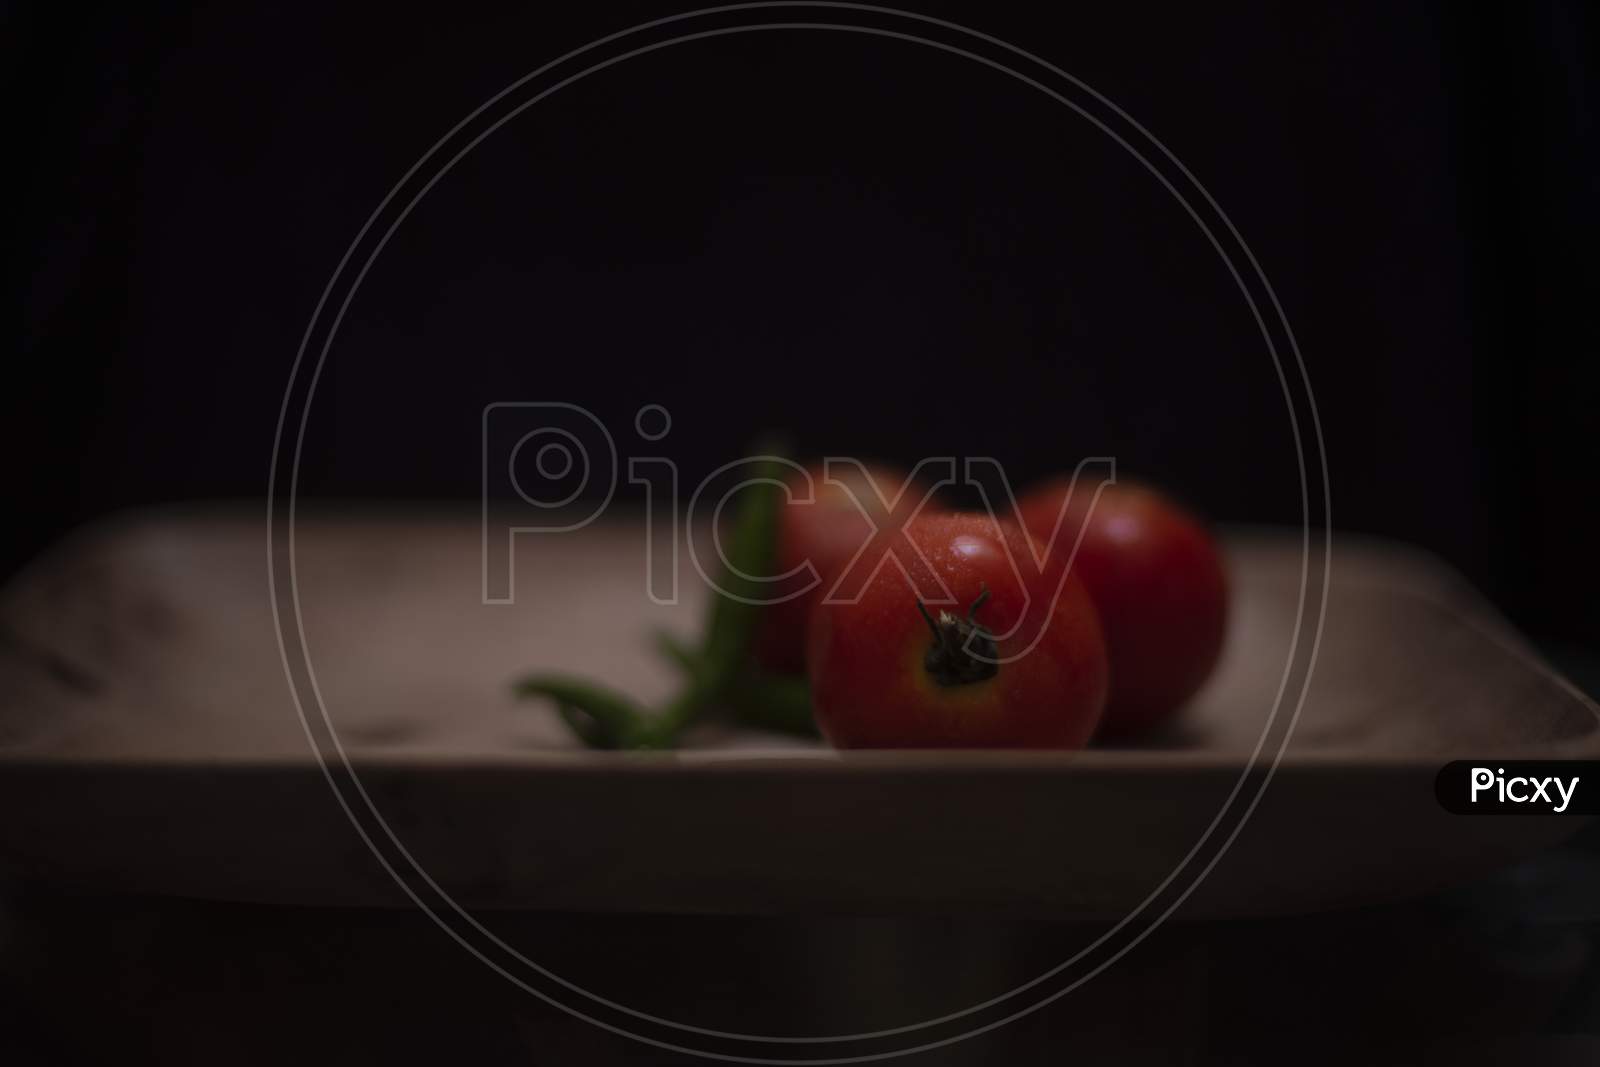 Fresh red tomatoes and green chilies are kept on a wooden tray in a dark copy space background